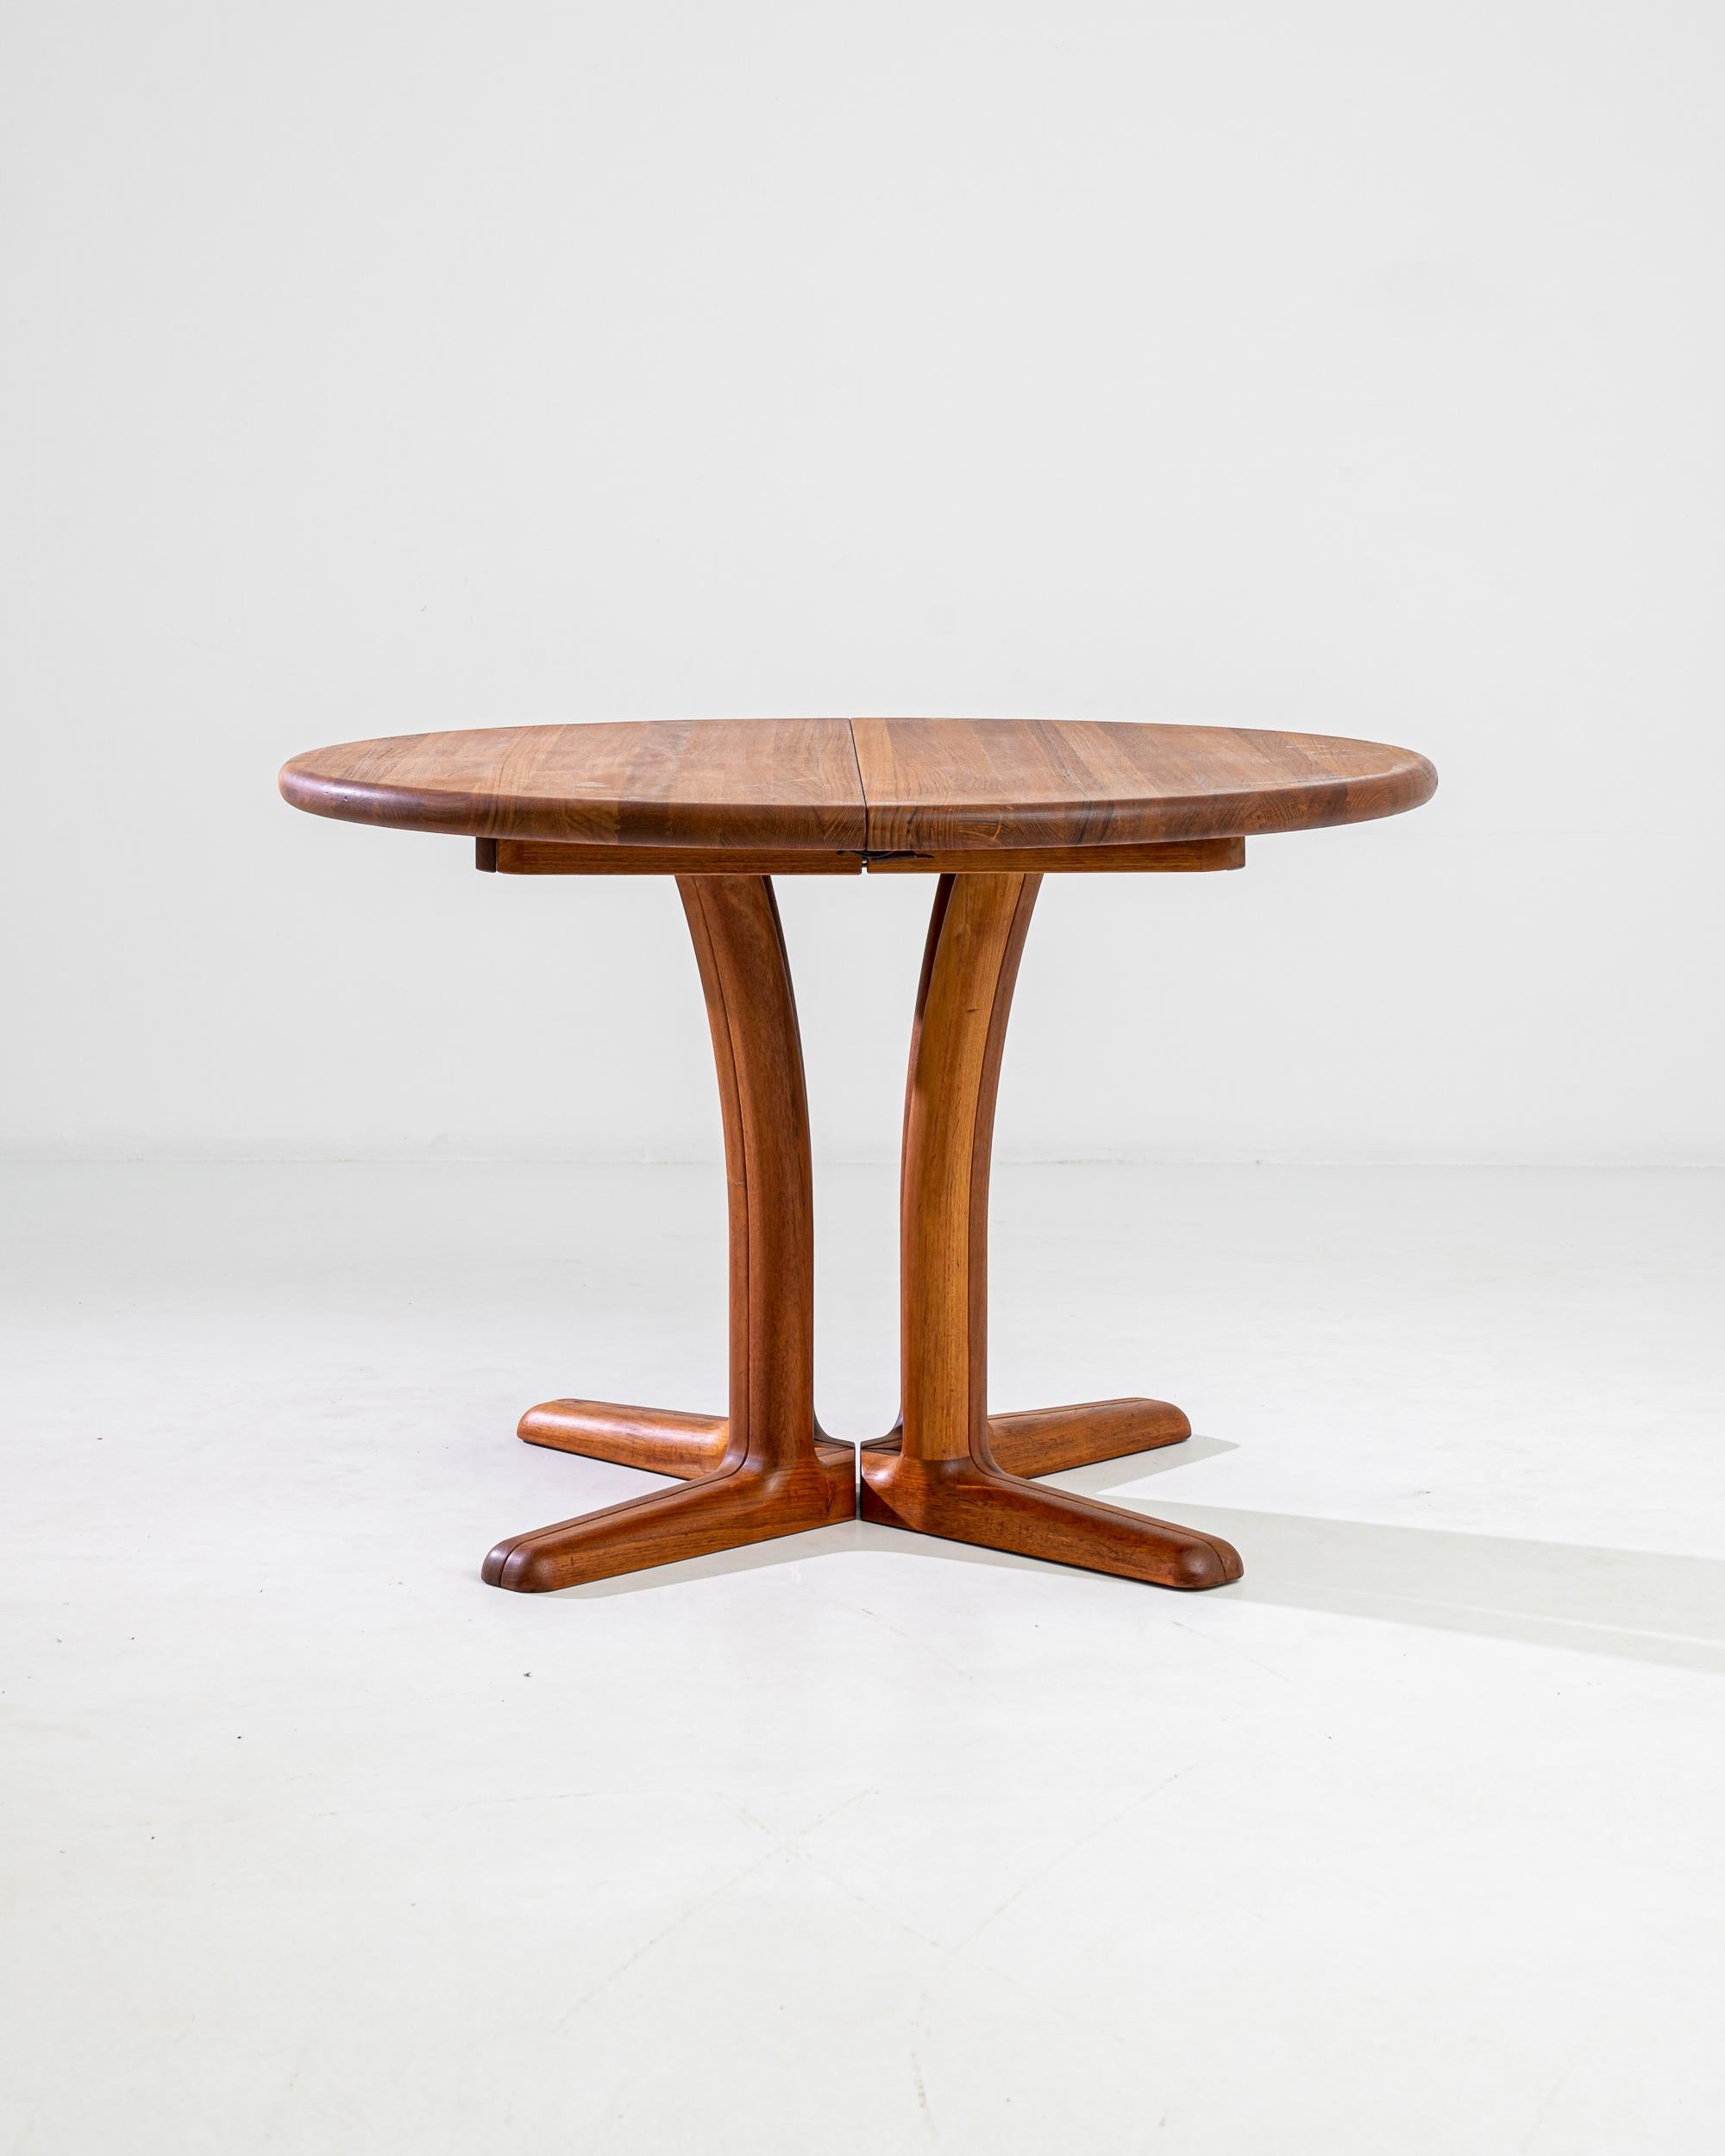 The Mid Century silhouette makes this circular teak table a delightful find. Made by Danish furniture manufacturers Gudme Mobelfabrik in the 1960s, the design combines sleek lines with an air of joyful levity in typical Scandinavian Modernist